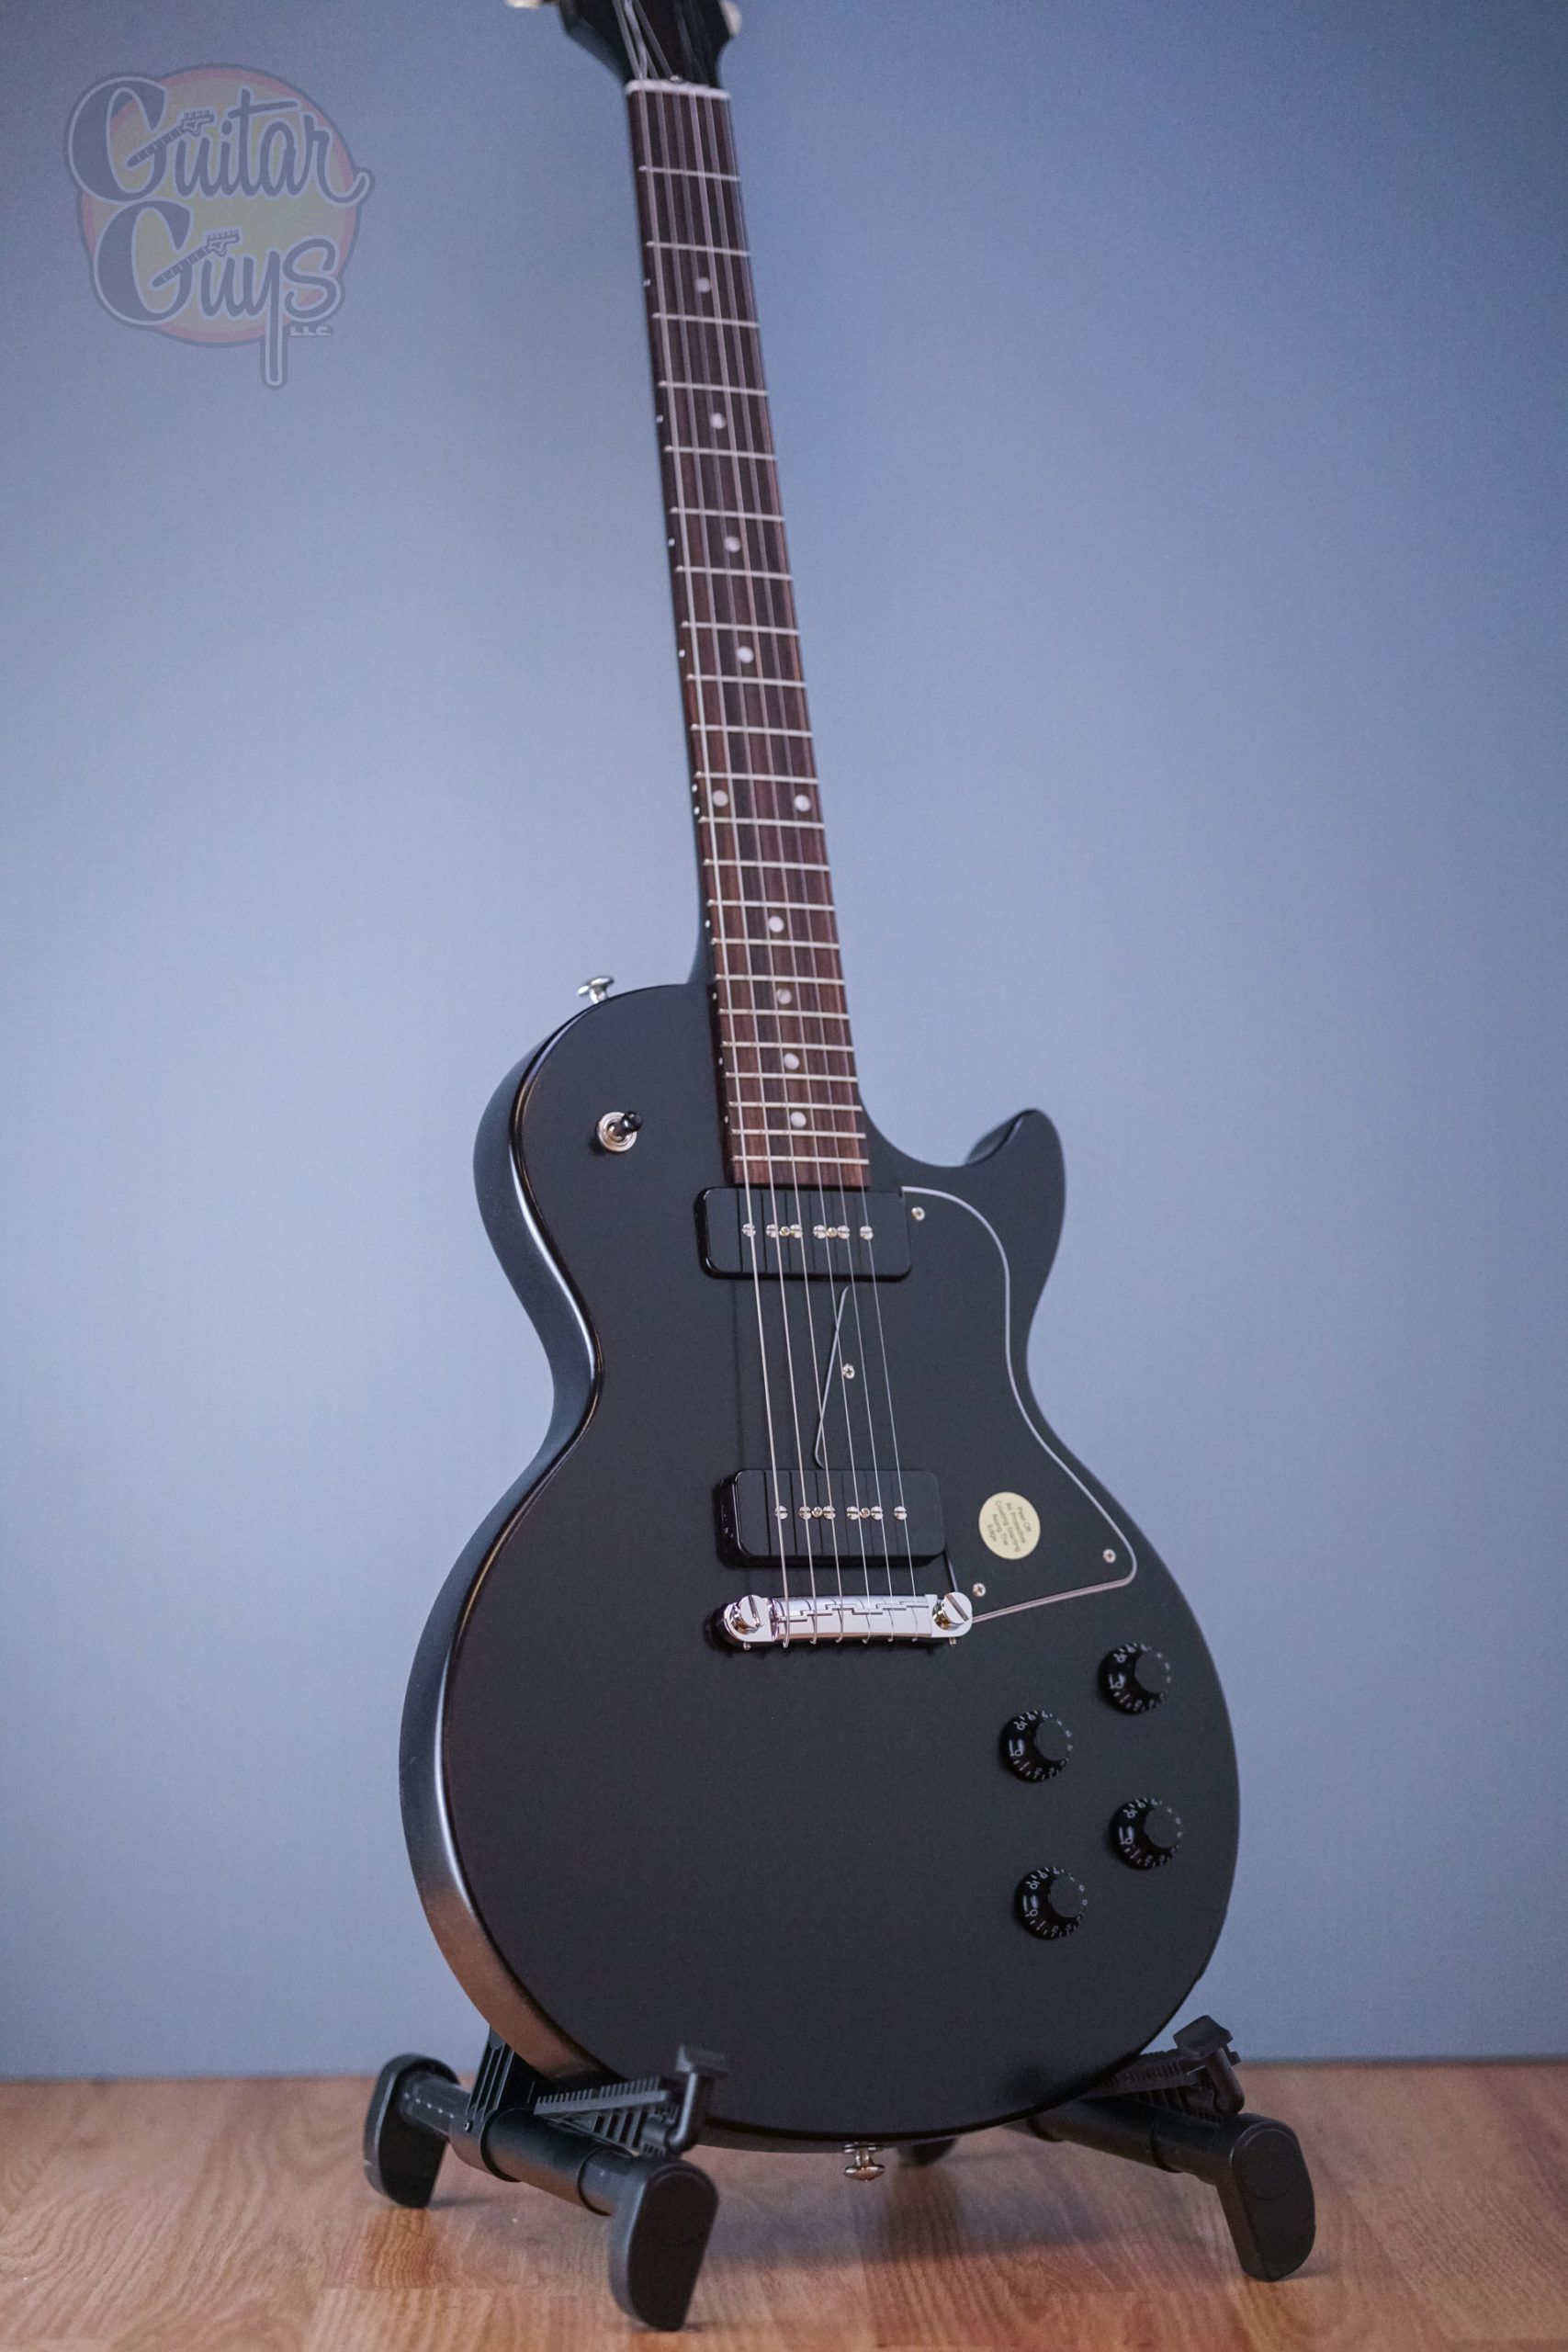 Gibson lespaul special P90 black